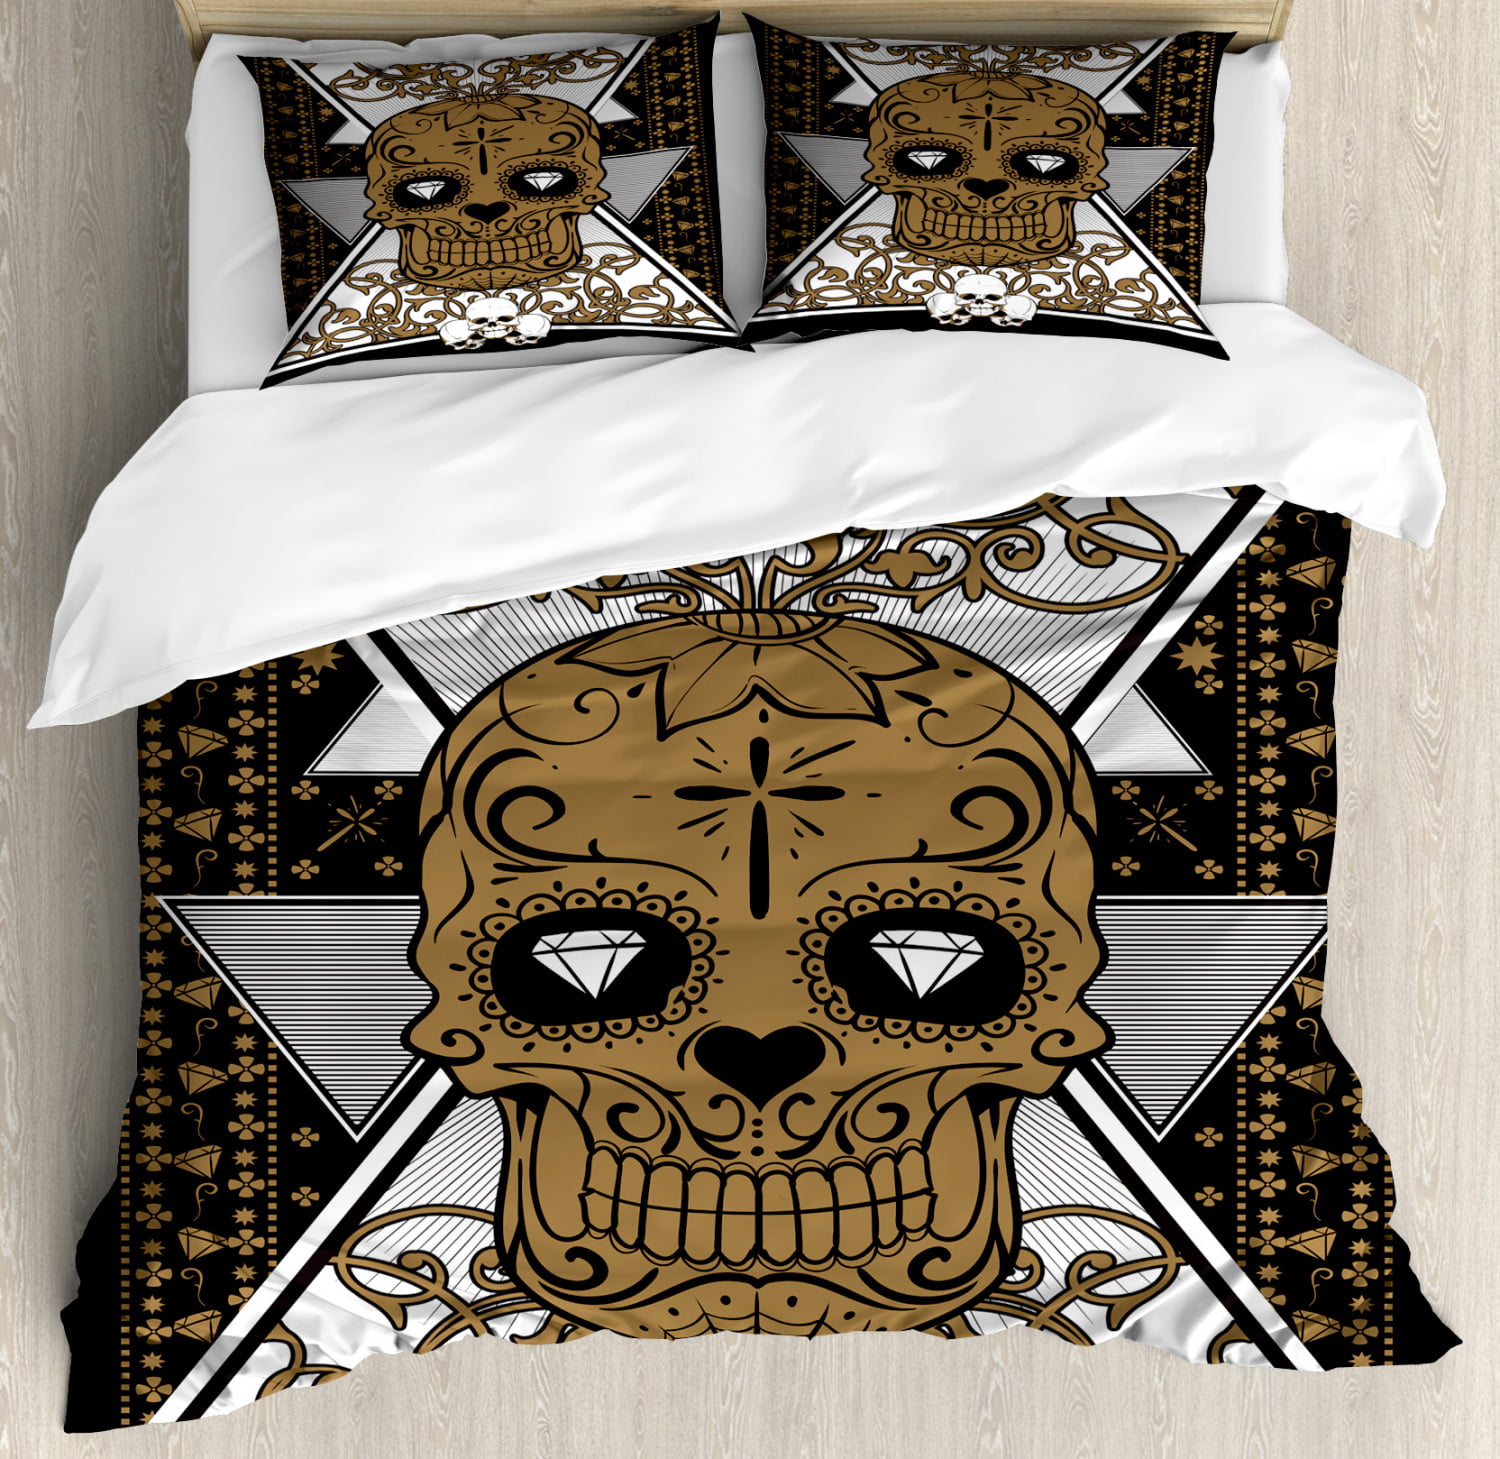 Tattoo Decor King Size Duvet Cover Set, Wise Old and Brave Viking Warrior  with his Long White Beard and Armour, Decorative 3 Piece Bedding Set with 2  Pillow Shams, White and Black,